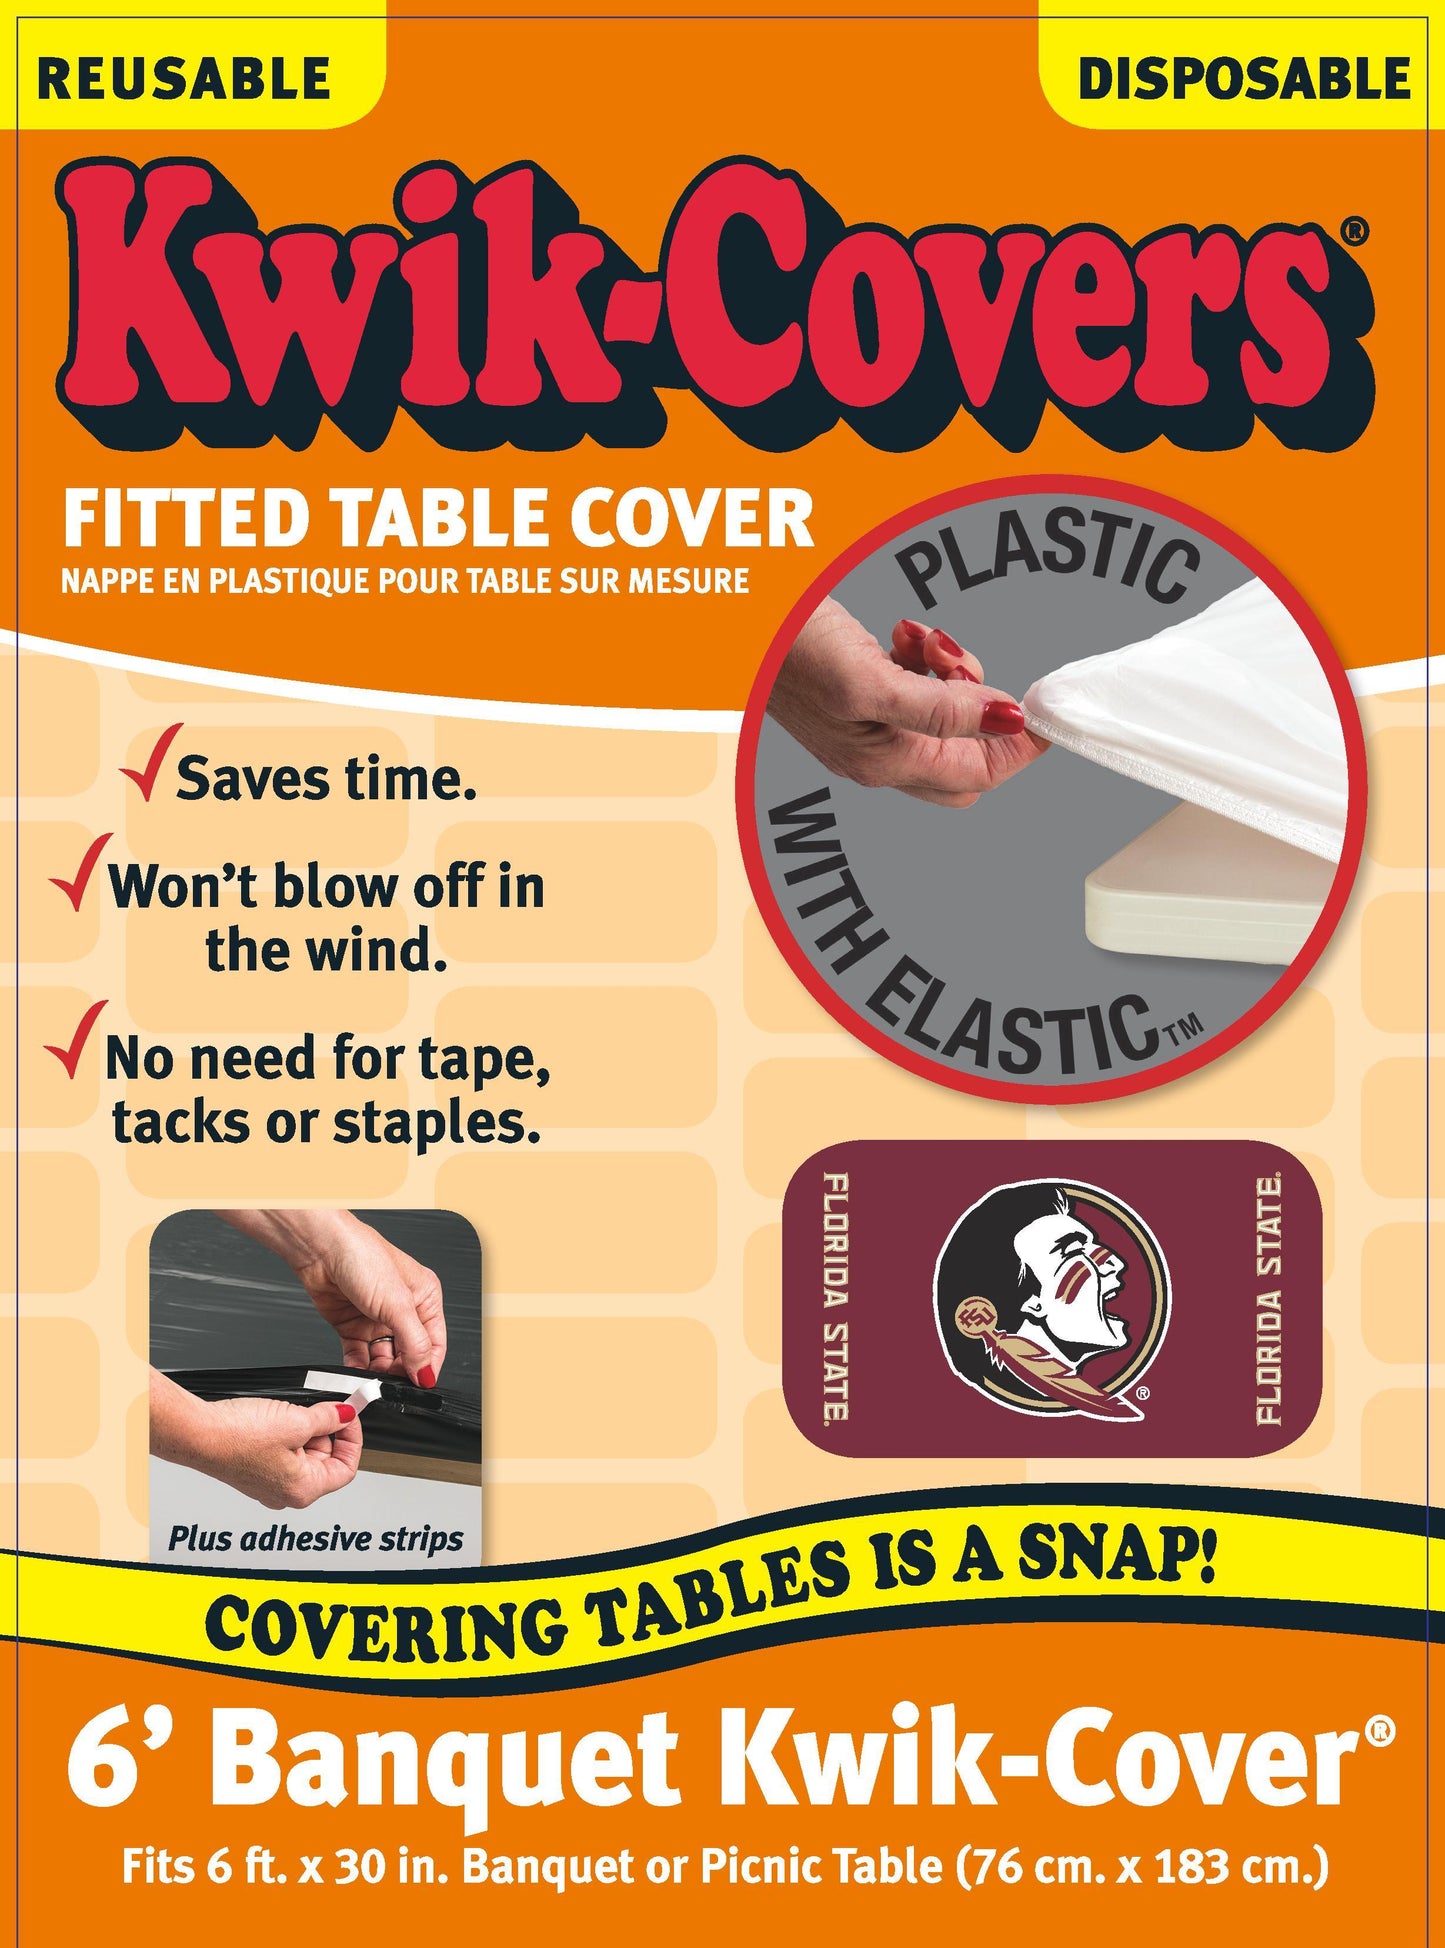 Collegiate Kwik-Covers Rectangle Plastic Table Cover (Florida State University)